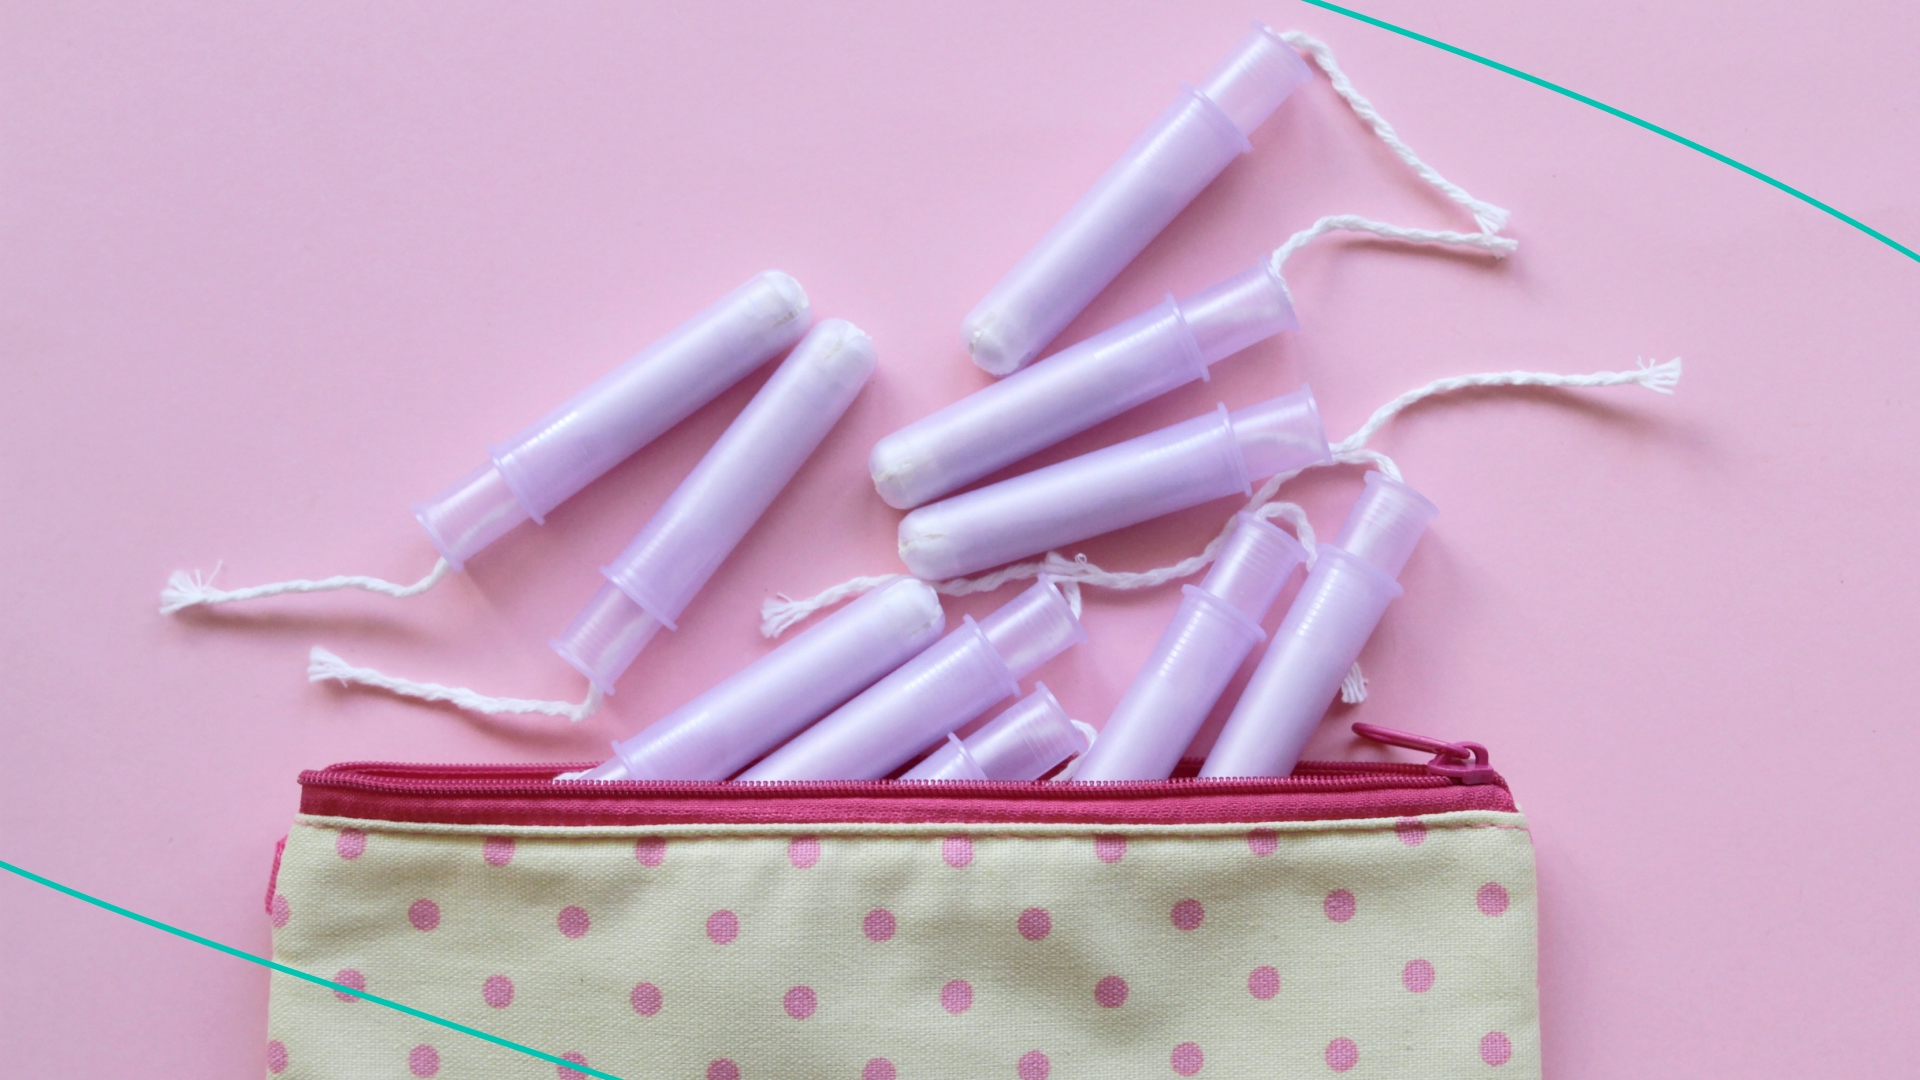 Menstrual bag with cotton tampons, sanitary napkins and pills on pink background